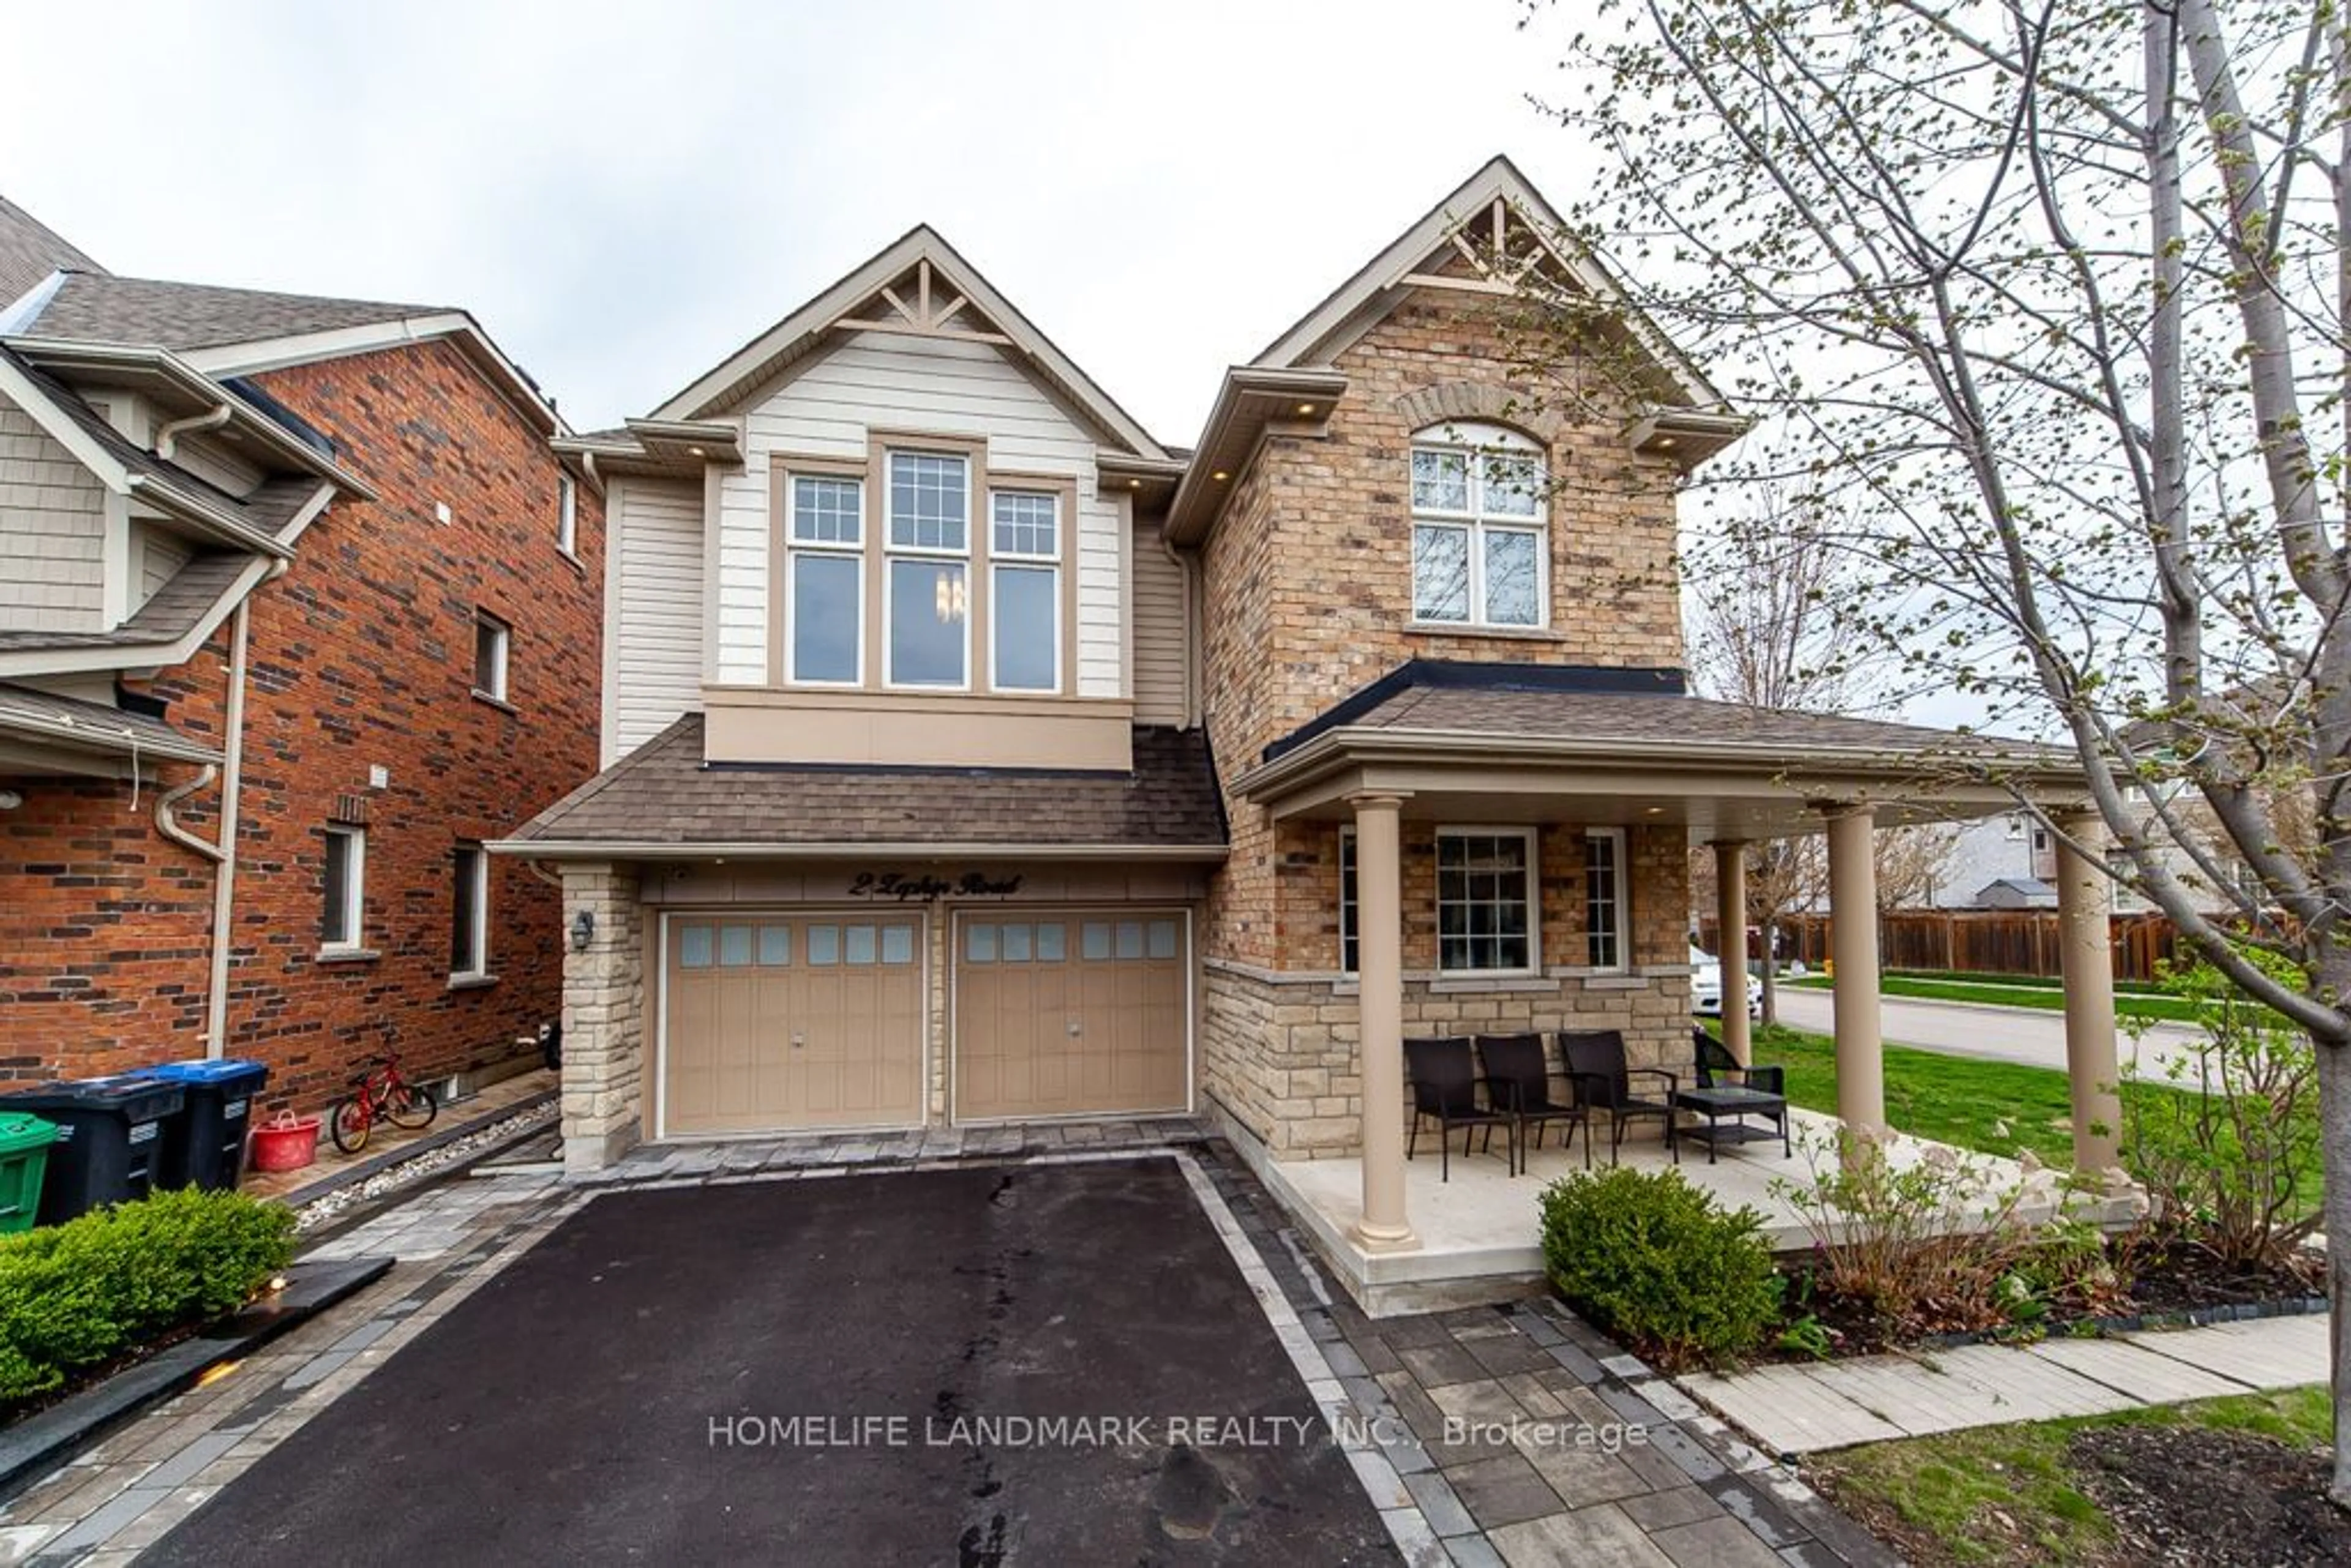 Home with brick exterior material for 2 Zephyr Rd, Caledon Ontario L7C 3V9